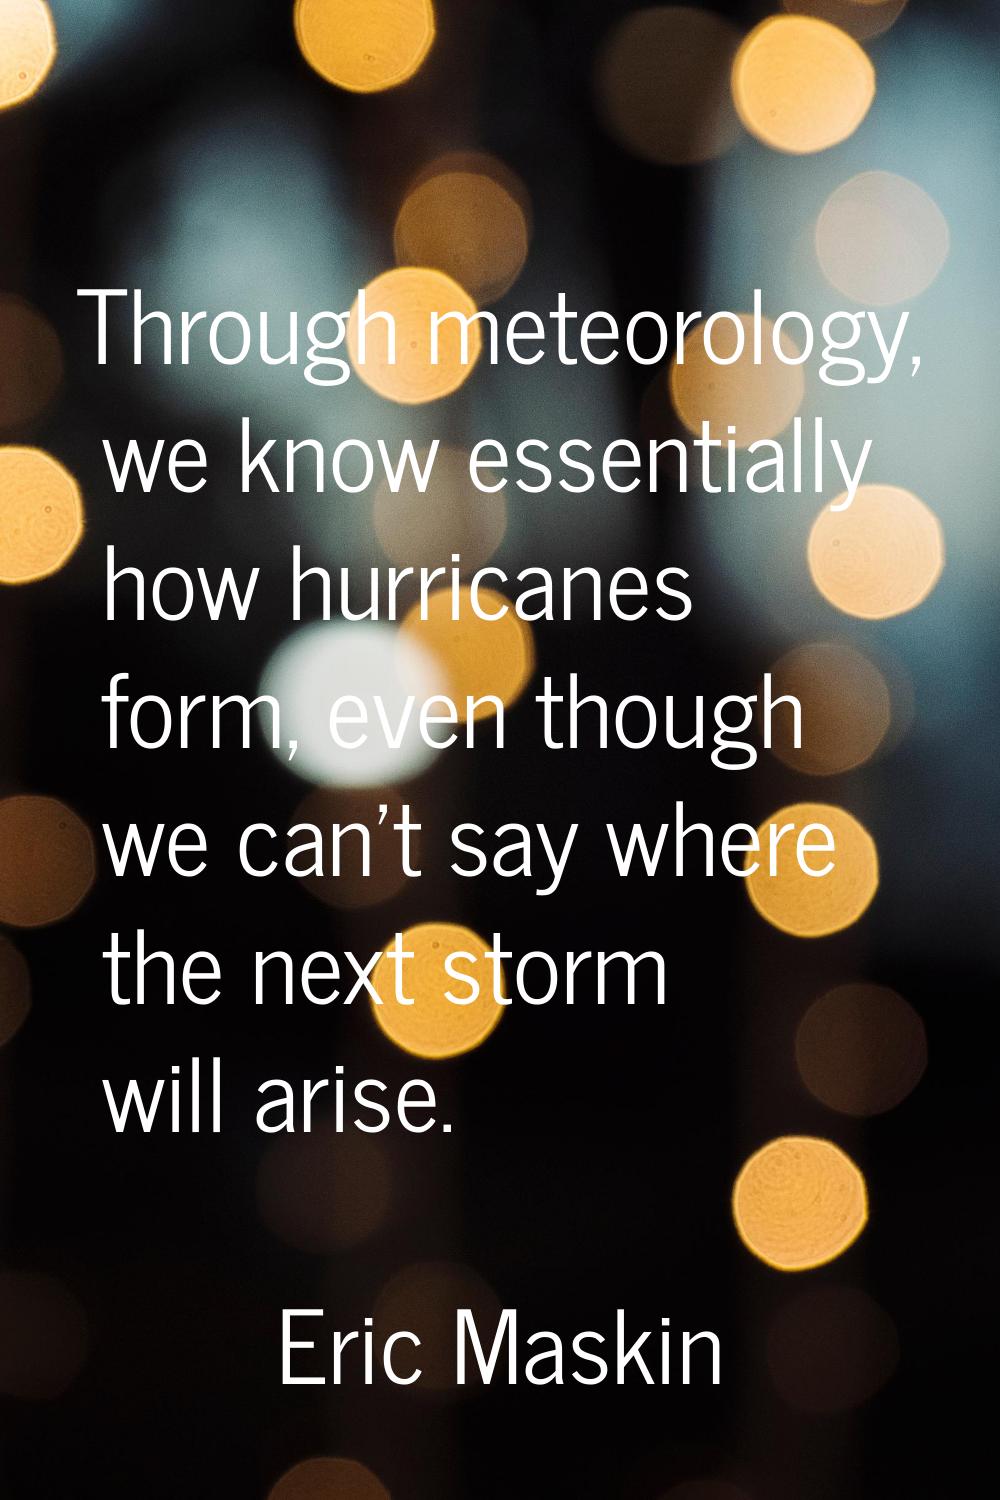 Through meteorology, we know essentially how hurricanes form, even though we can't say where the ne